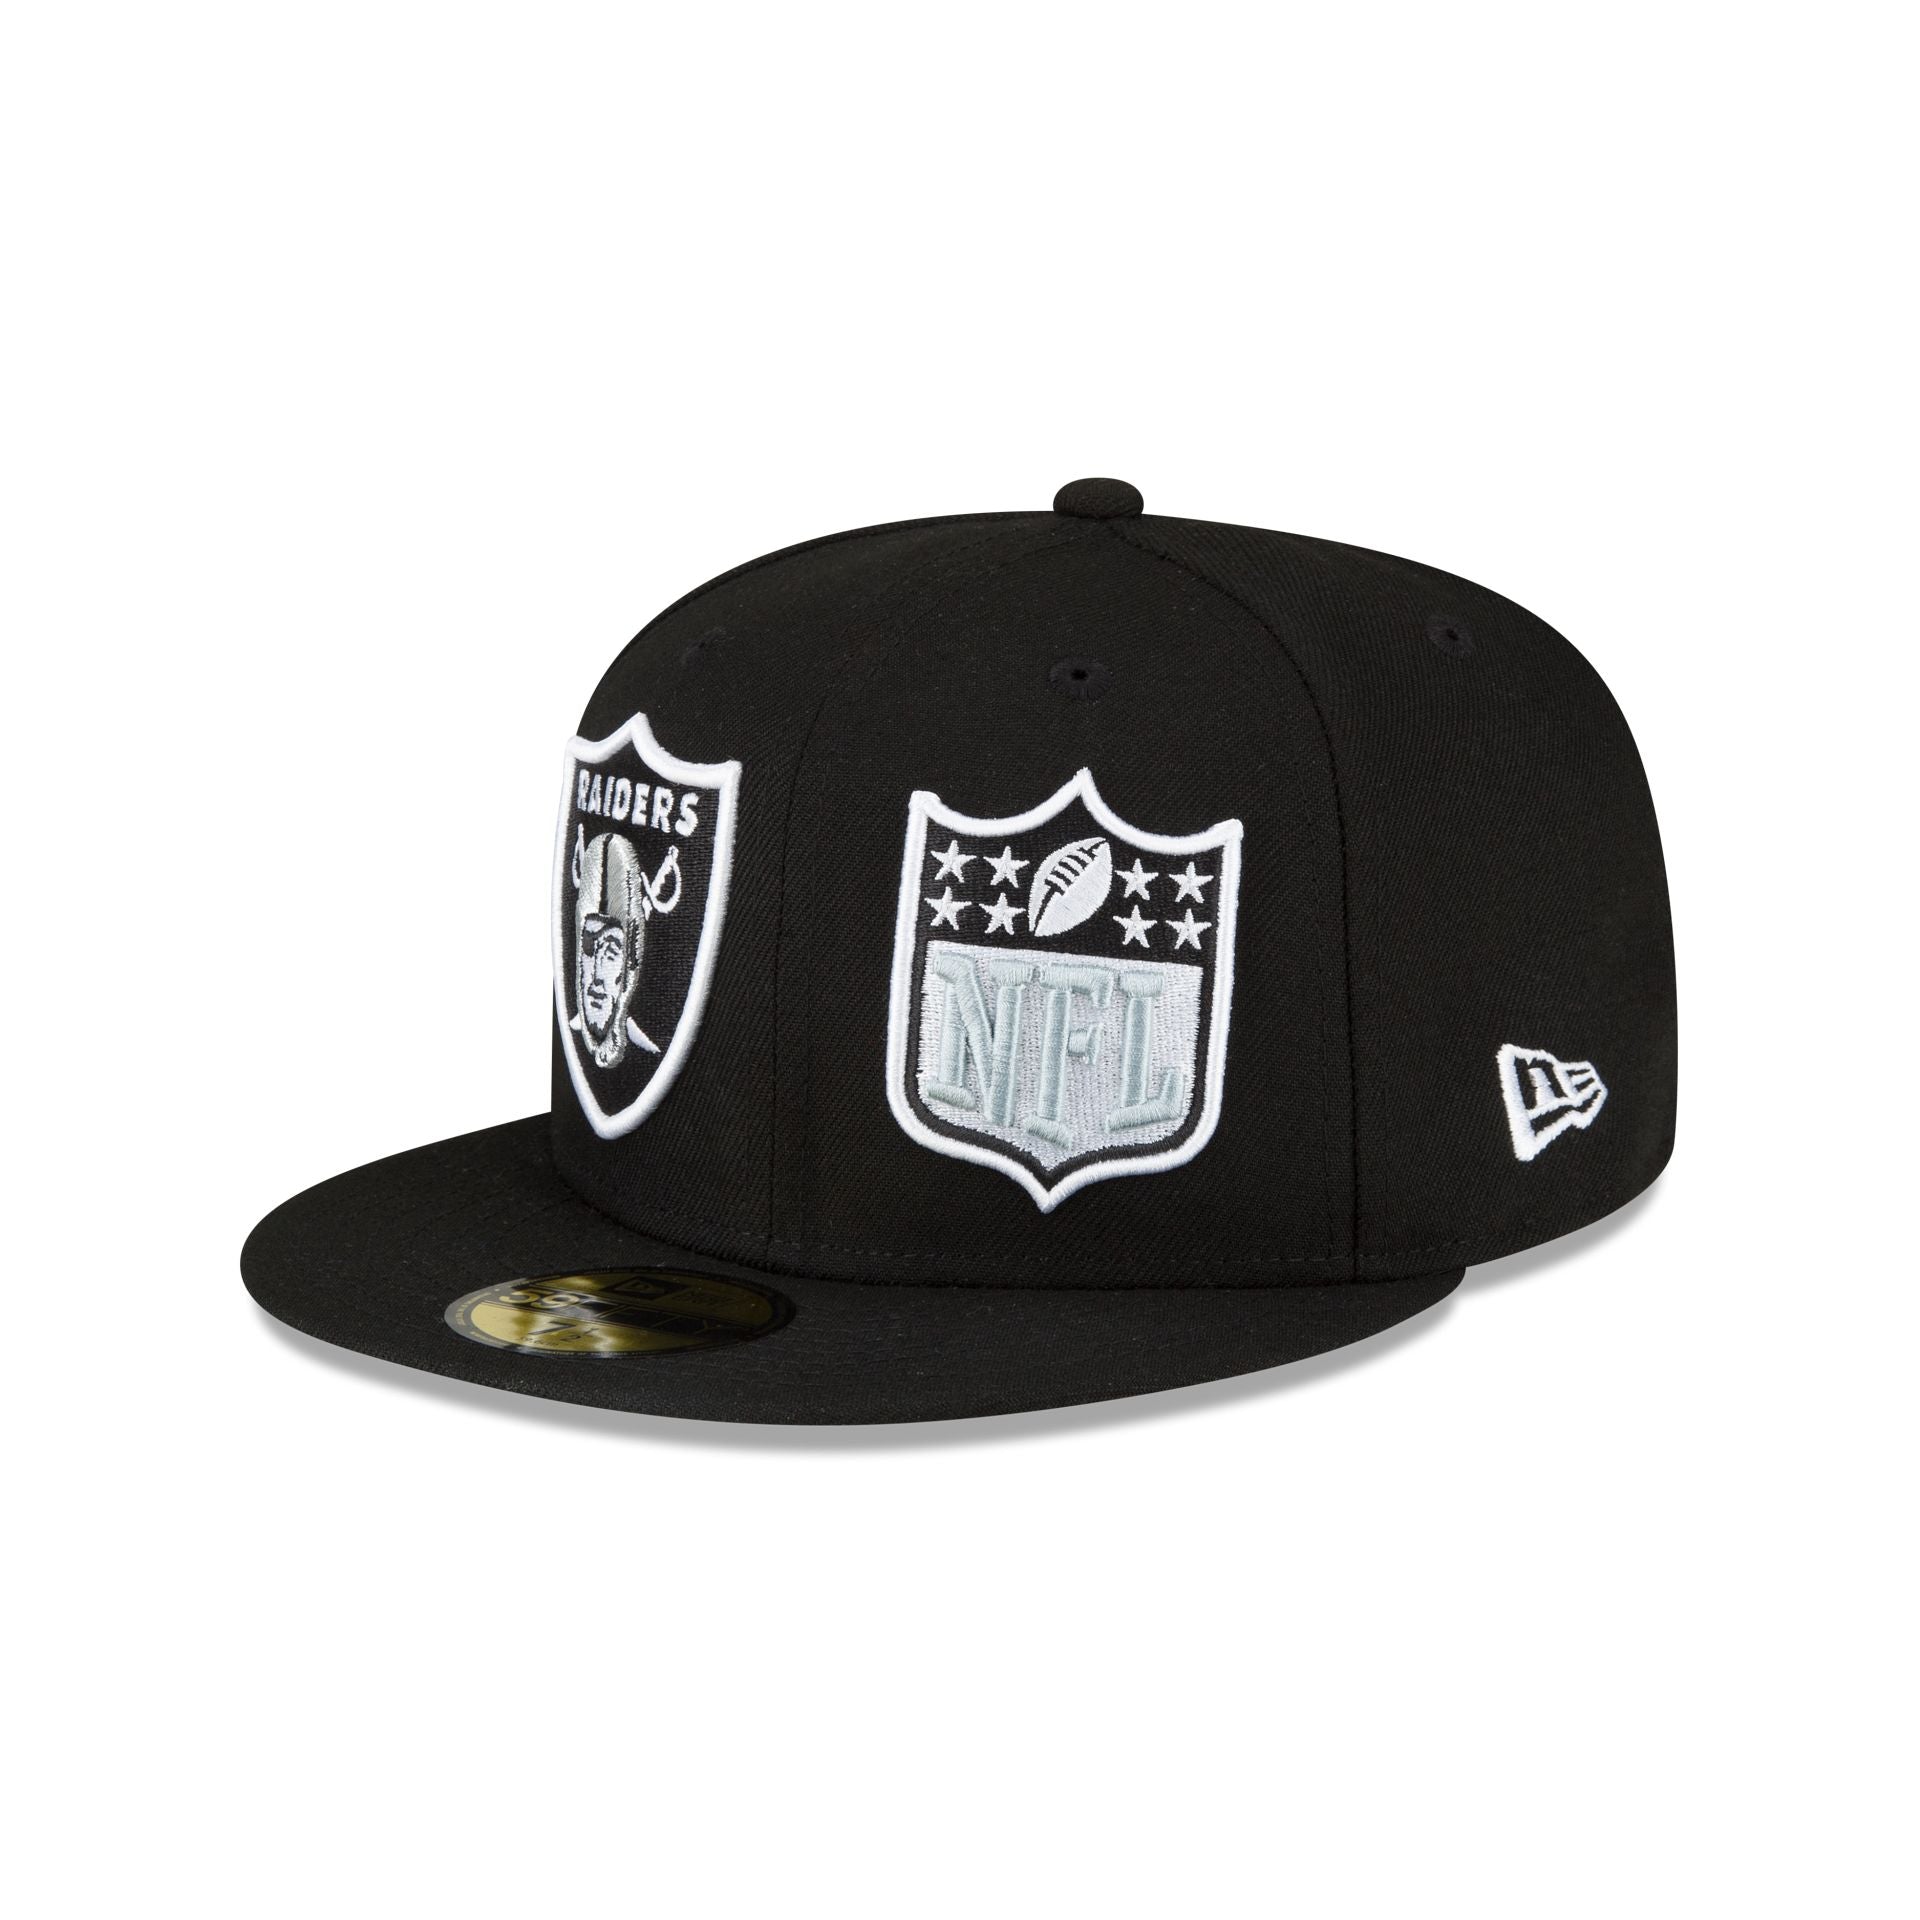 Las Vegas Raiders Fitted New Era 59FIFTY Starry Black Cap Hat